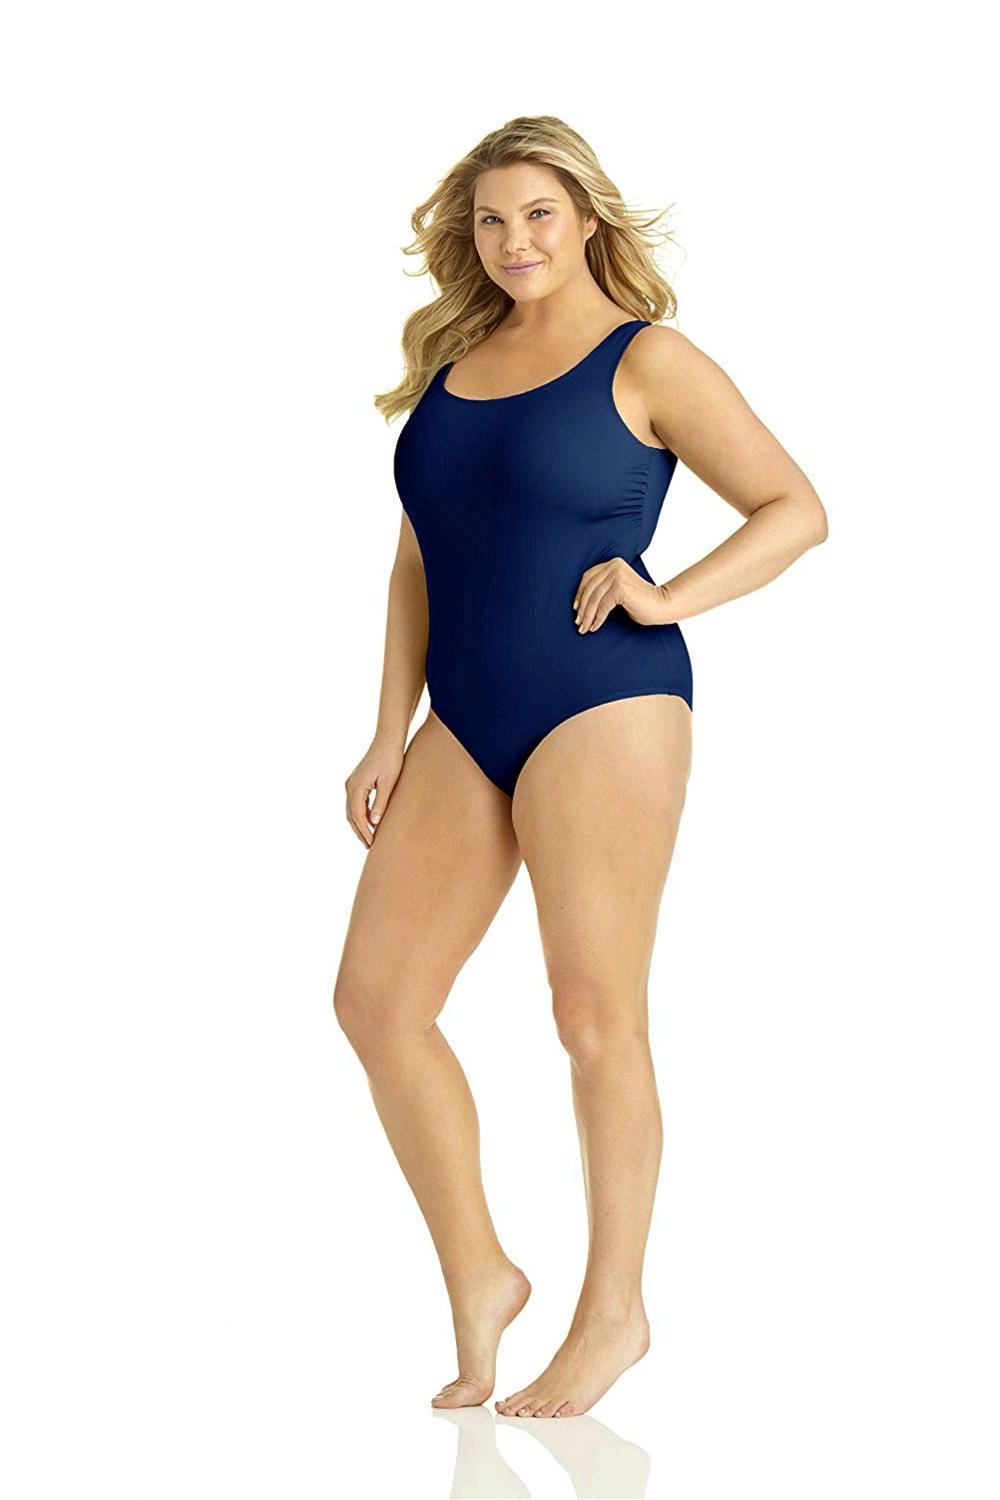 ribbed one piece swimsuit